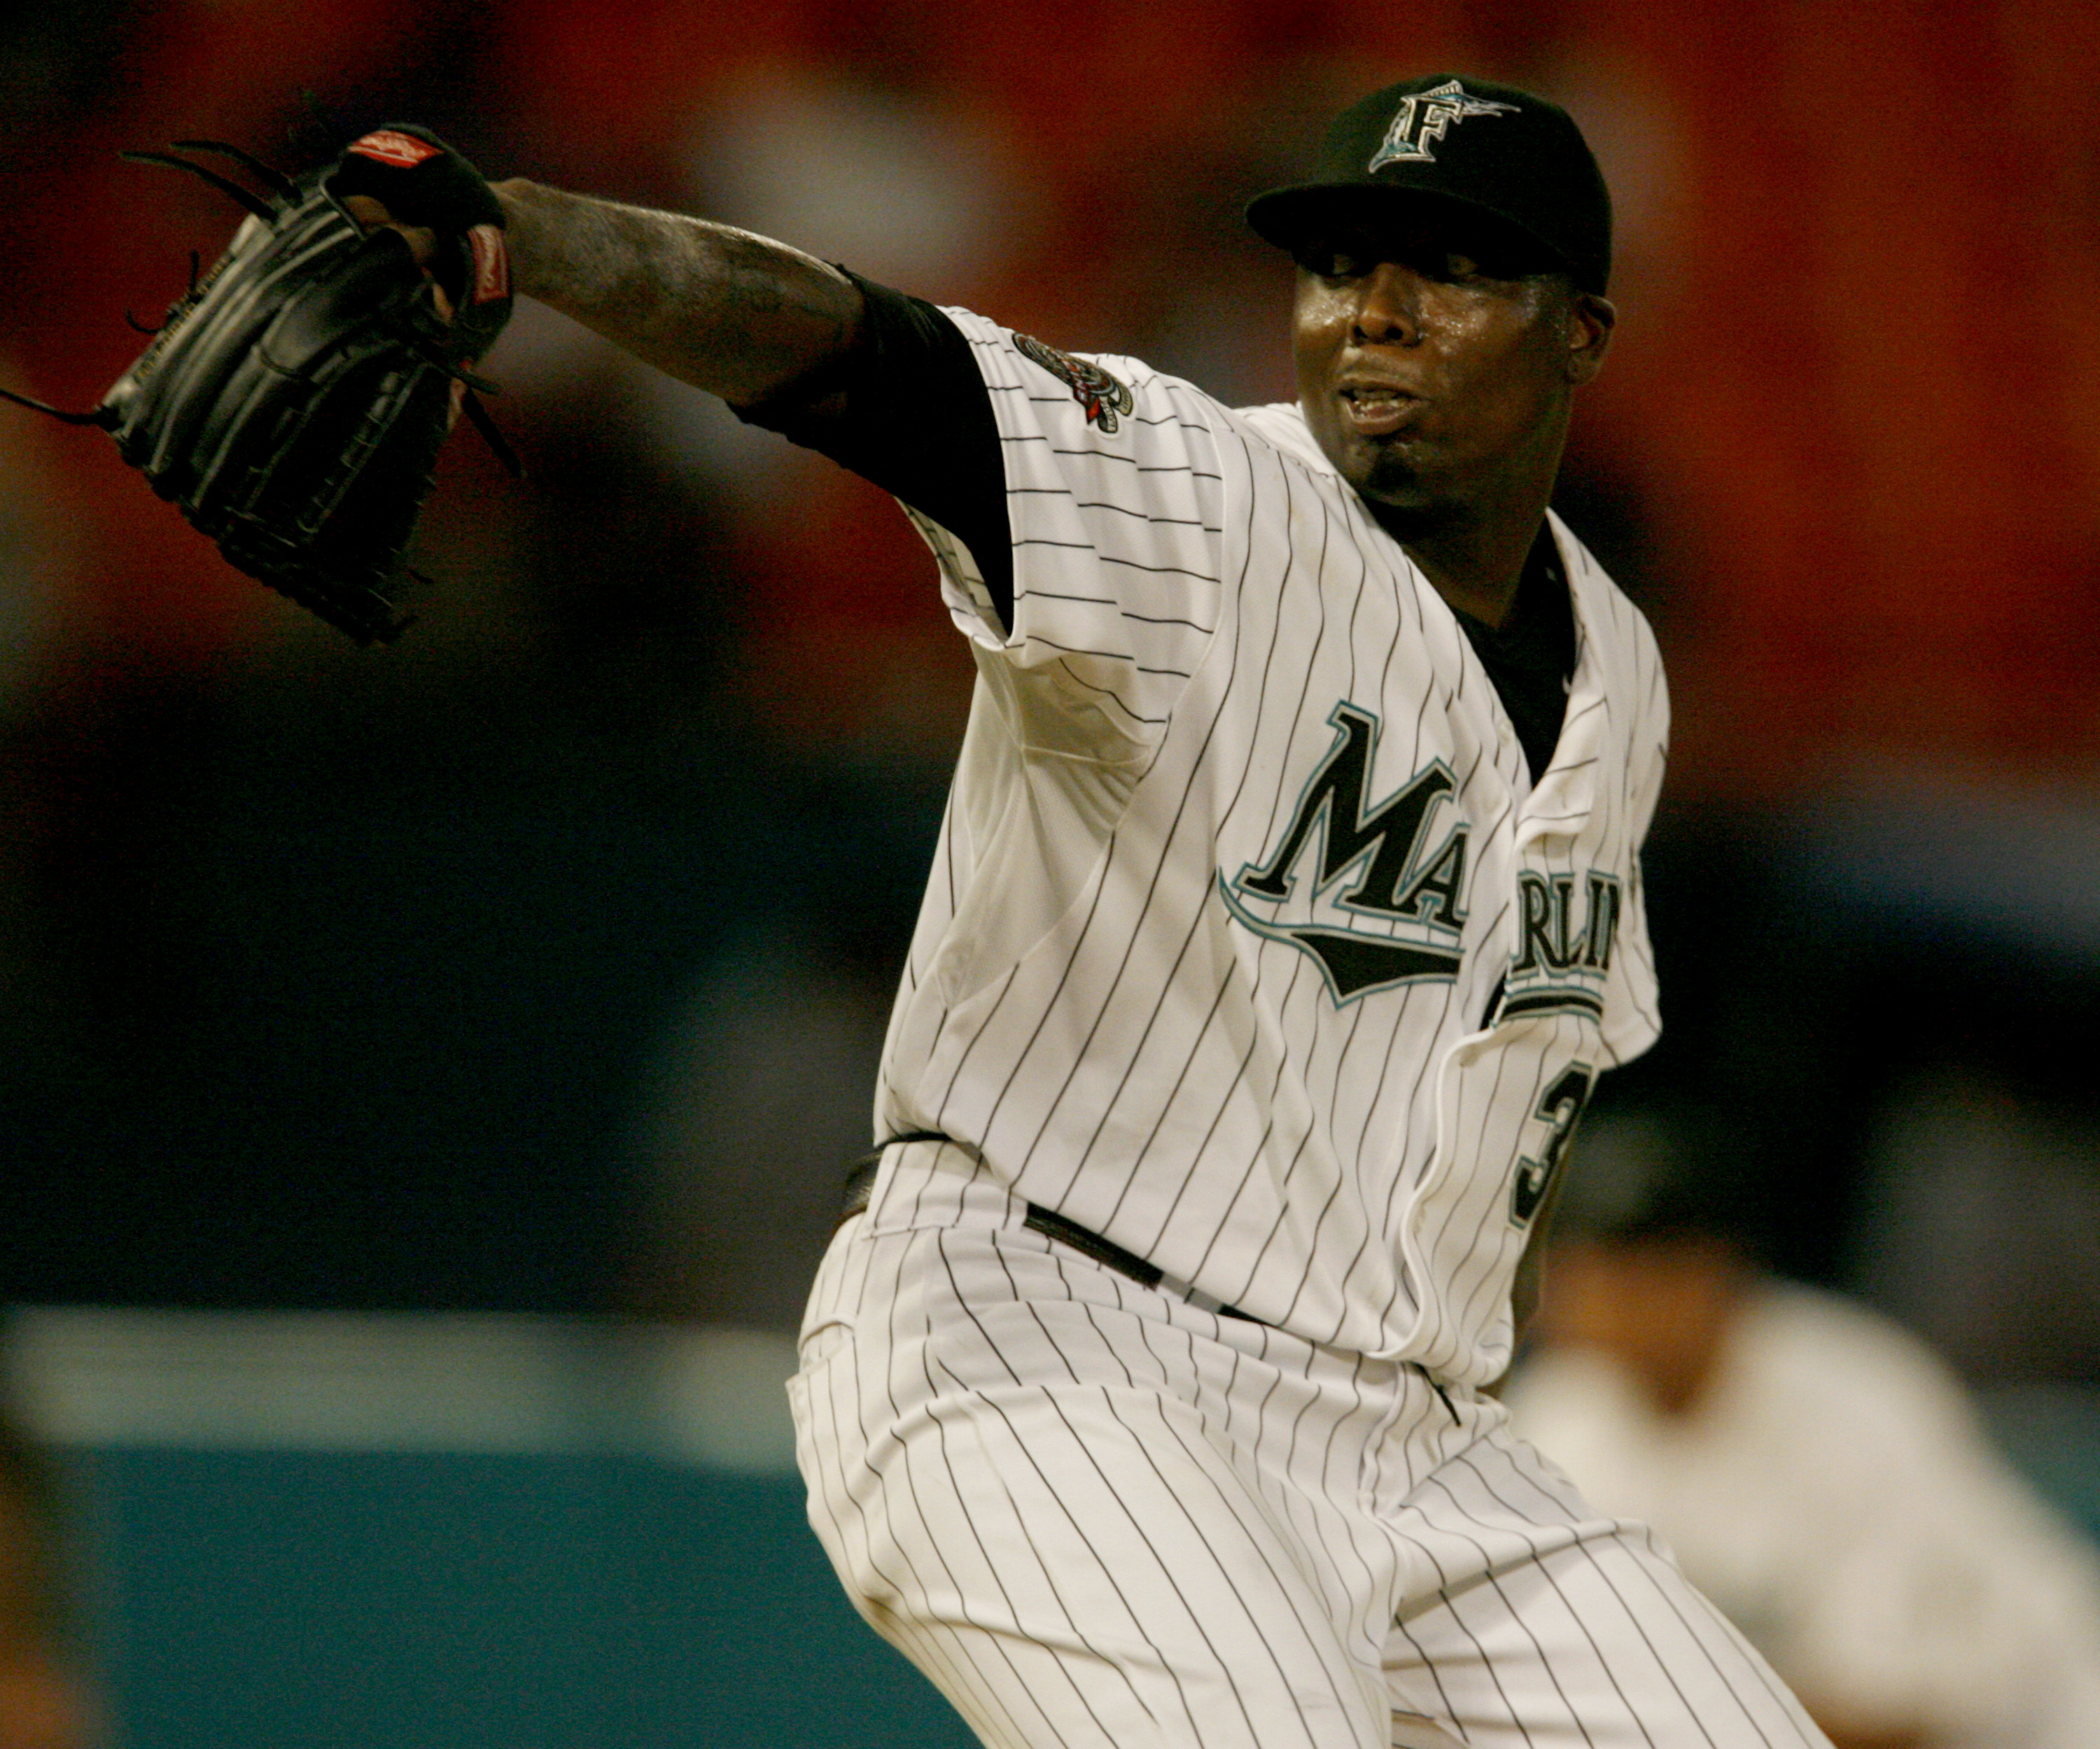 Florida Marlins’ Dontrelle Willis pitches in the fifth inning against the Chicago Cubs at Dolphin Stadium in Miami, Florida on Tuesday, September 25, 2007.